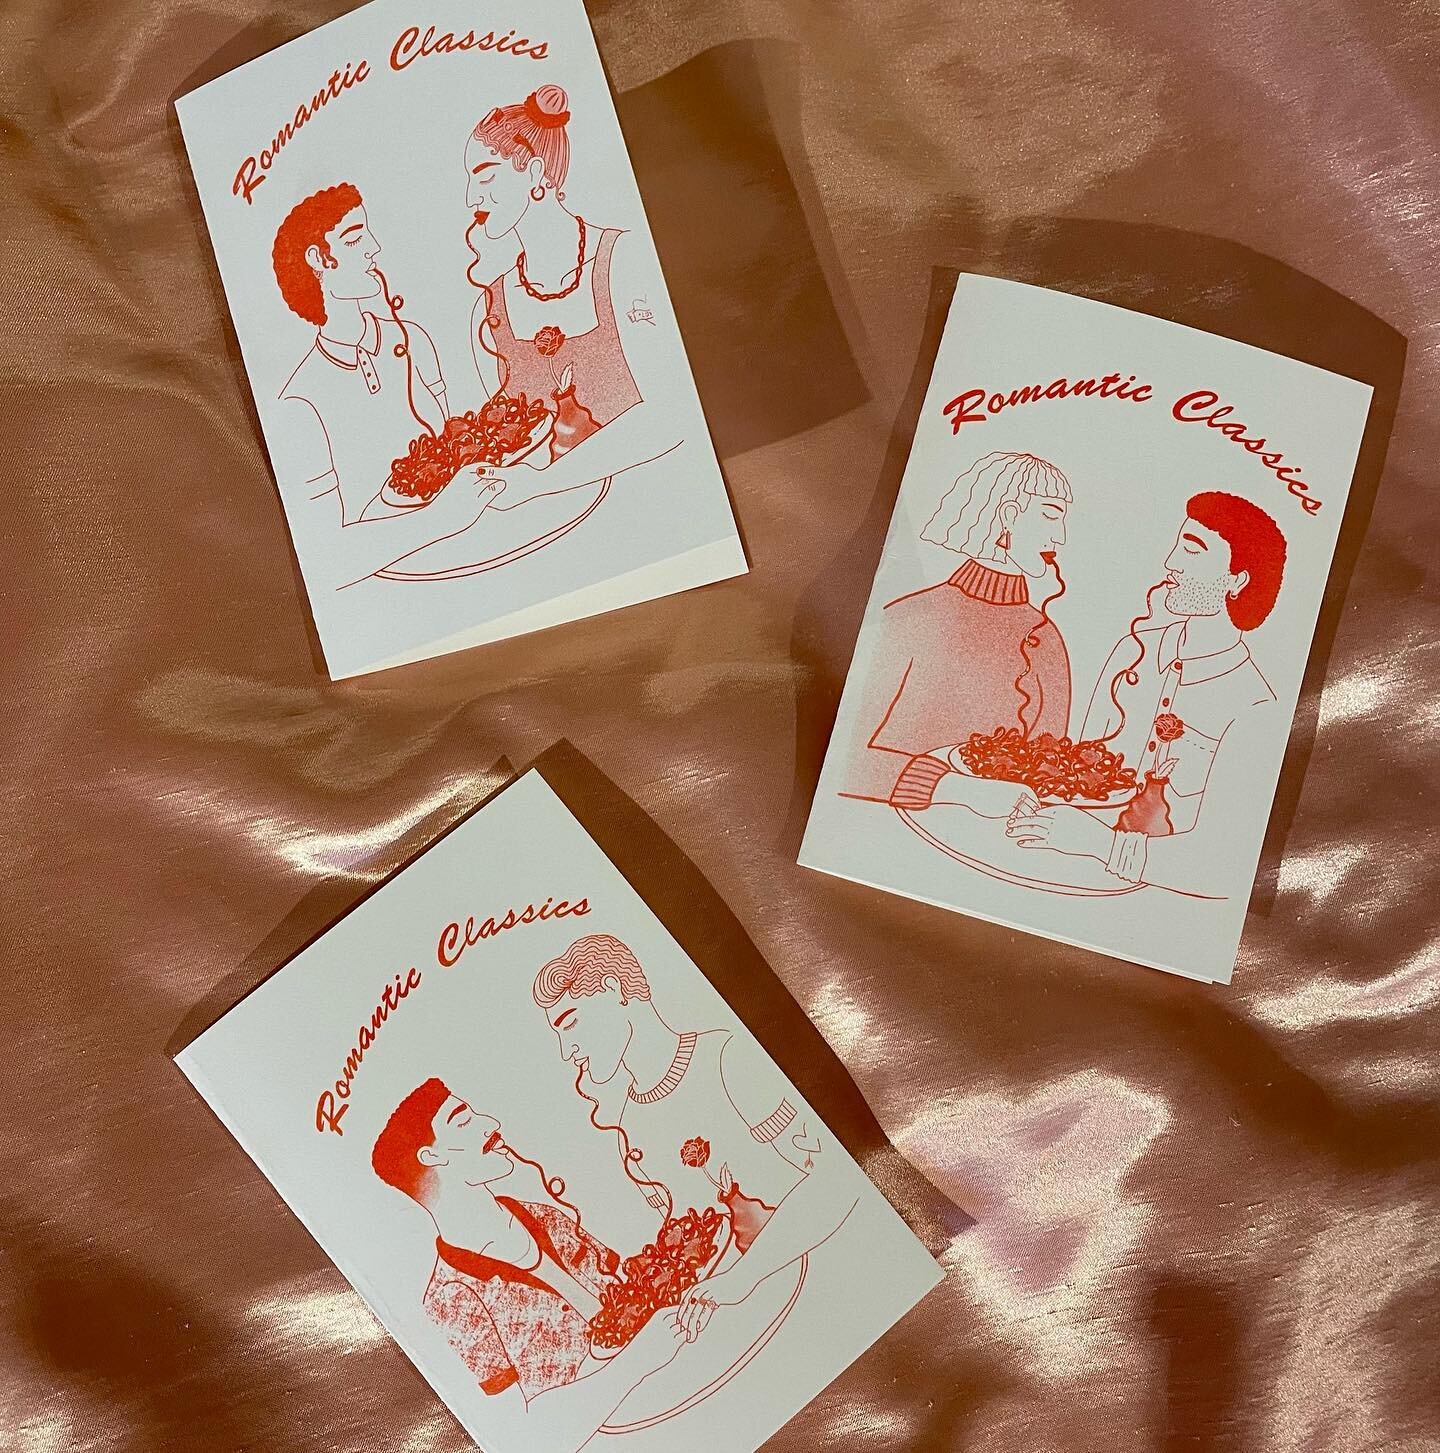 All Romantic Classics orders between now and Monday morning will get one of these lovely Valentine&rsquo;s Day cards added in 🌹🍝❣️ Thank you @risottostudio for printing them so nicely 💘